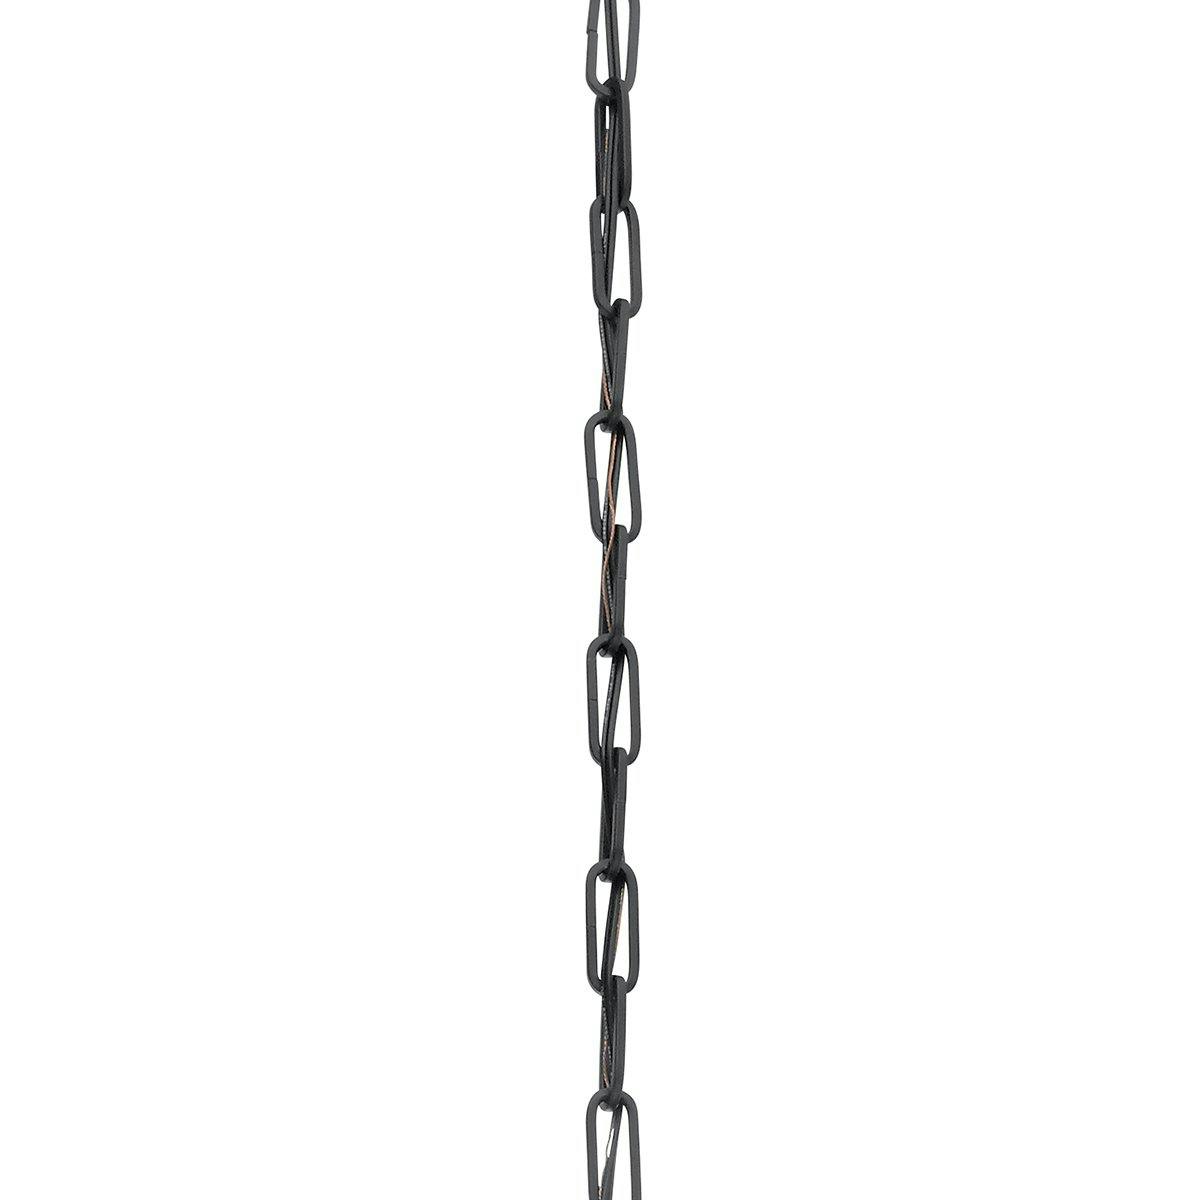 36" length of Chain Black finish on a white background